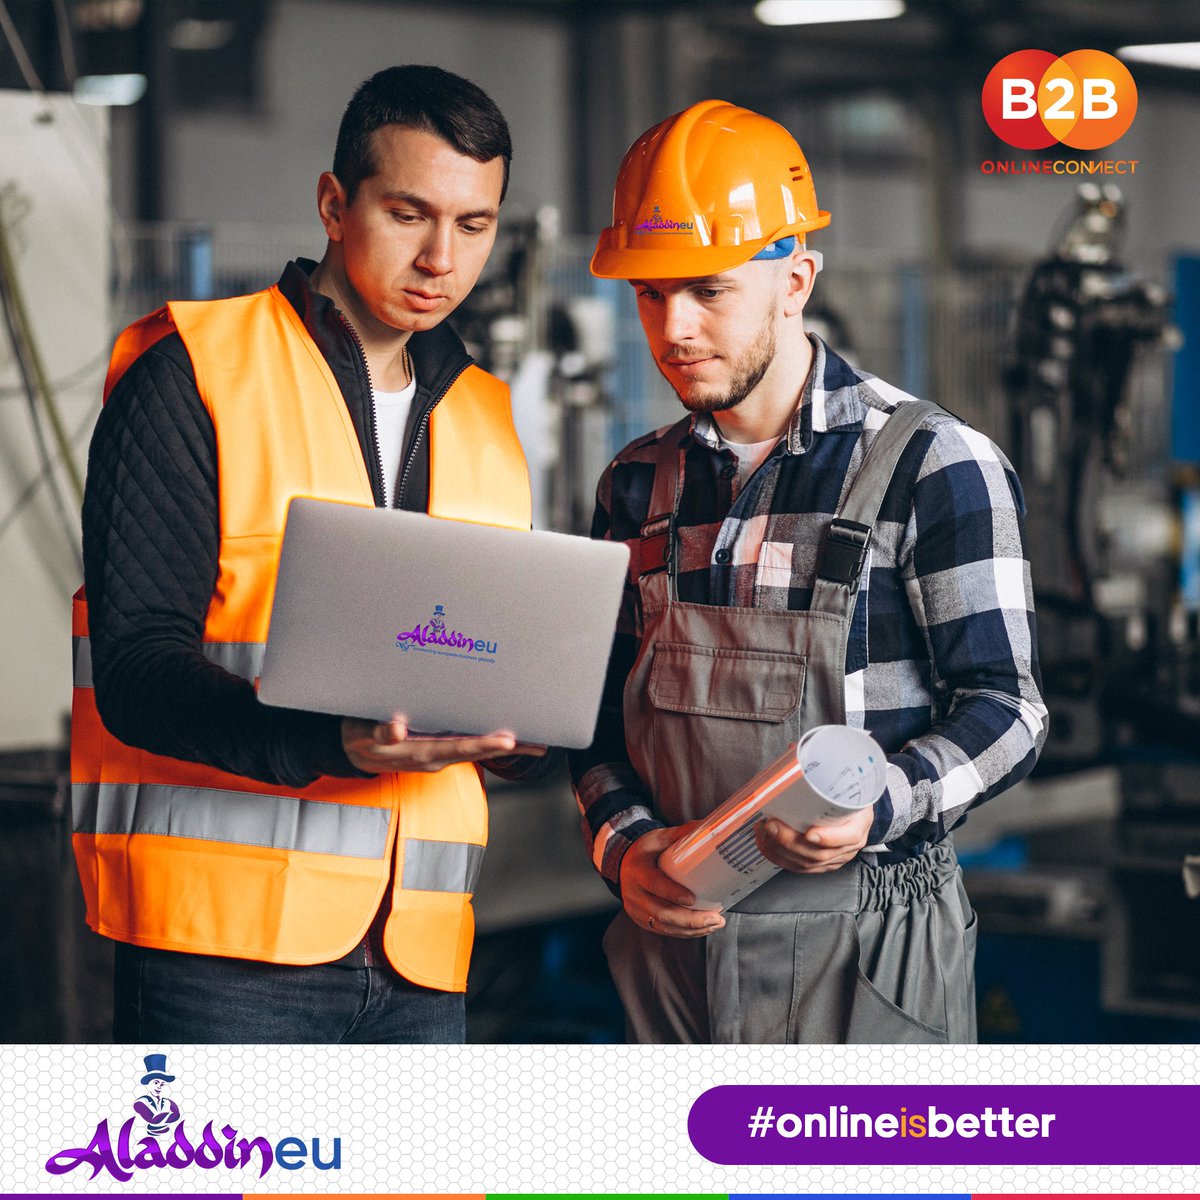 Aladdineu Is Designed To Facilitate All Your Business Needs Anywhere In Europe. 
-
Shift Your Business Online And Exclusive Tools and Expand Your Business.
-
👉👉👉aladdineu.com
-
-
#aladdineu #aladdineub2b #purplemagic #b2b #b2bmarketing #b2bplatform